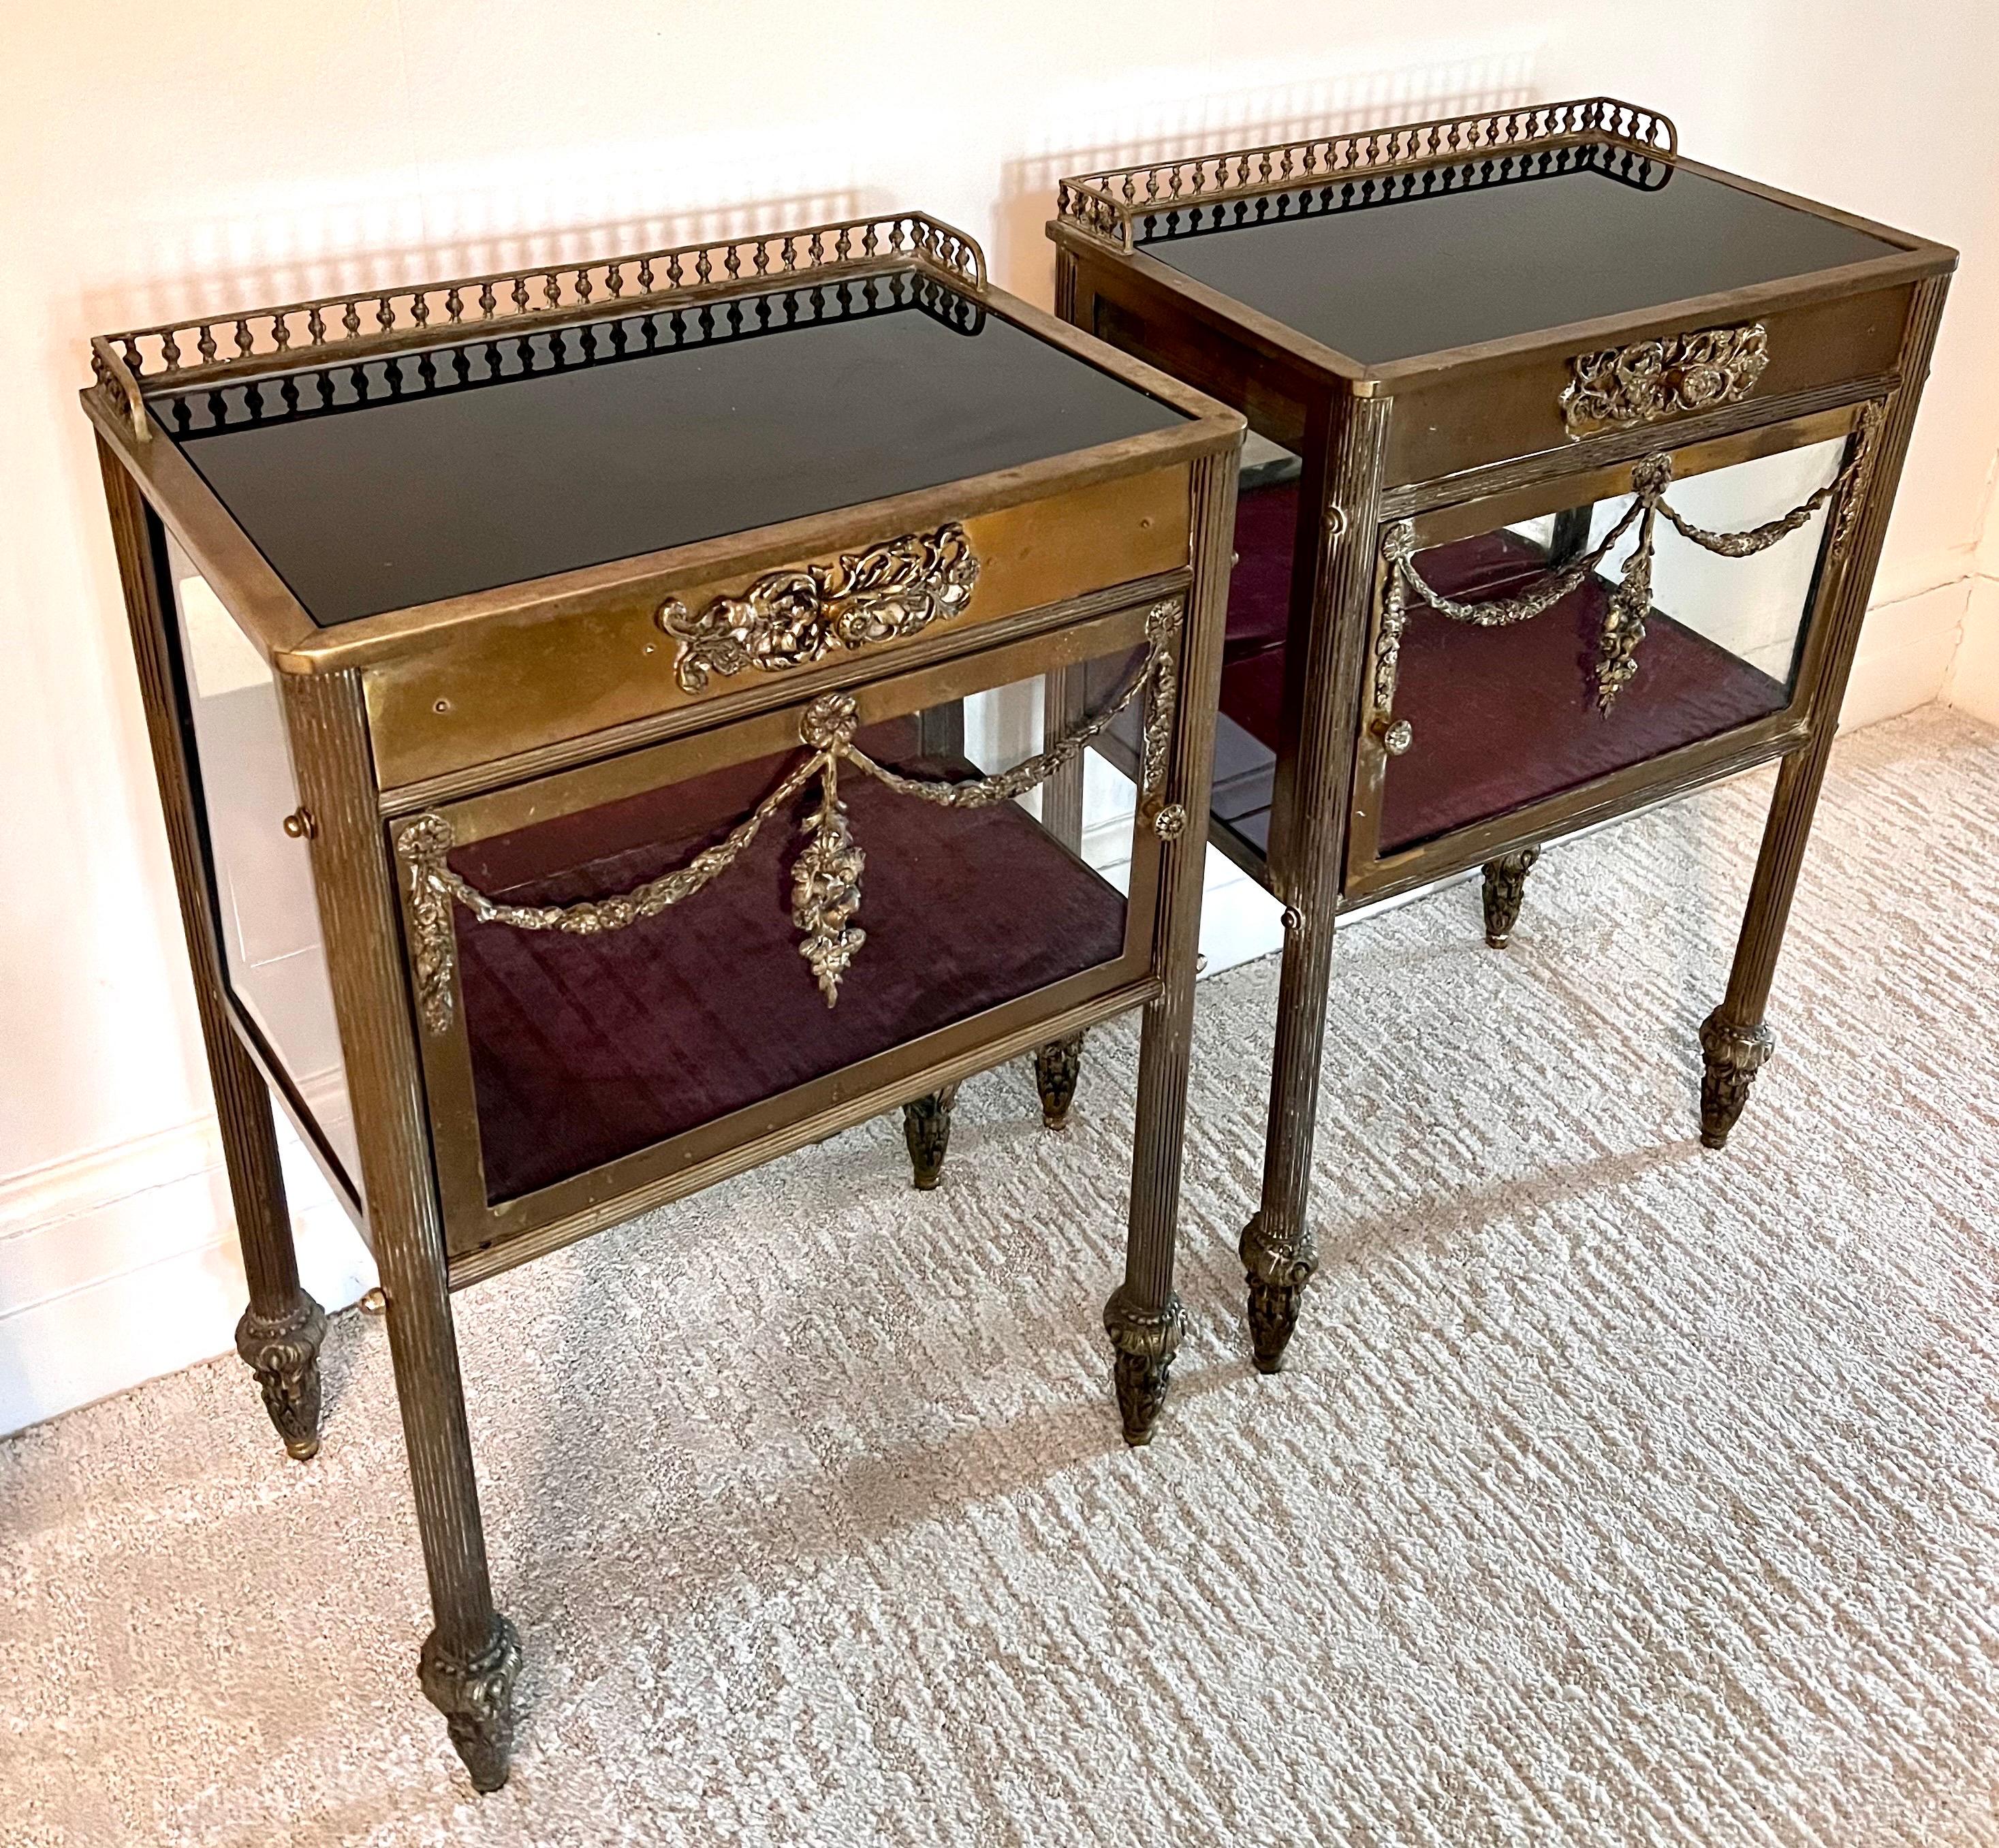 Antique 19th century French patinated brass and glass cased vitrine nightstands raised on fluted legs. Top is black glass with gallery and one drawer. Glass on front door and sides.
Mirrored glass inside back. Beautiful ornamental mounts decorate